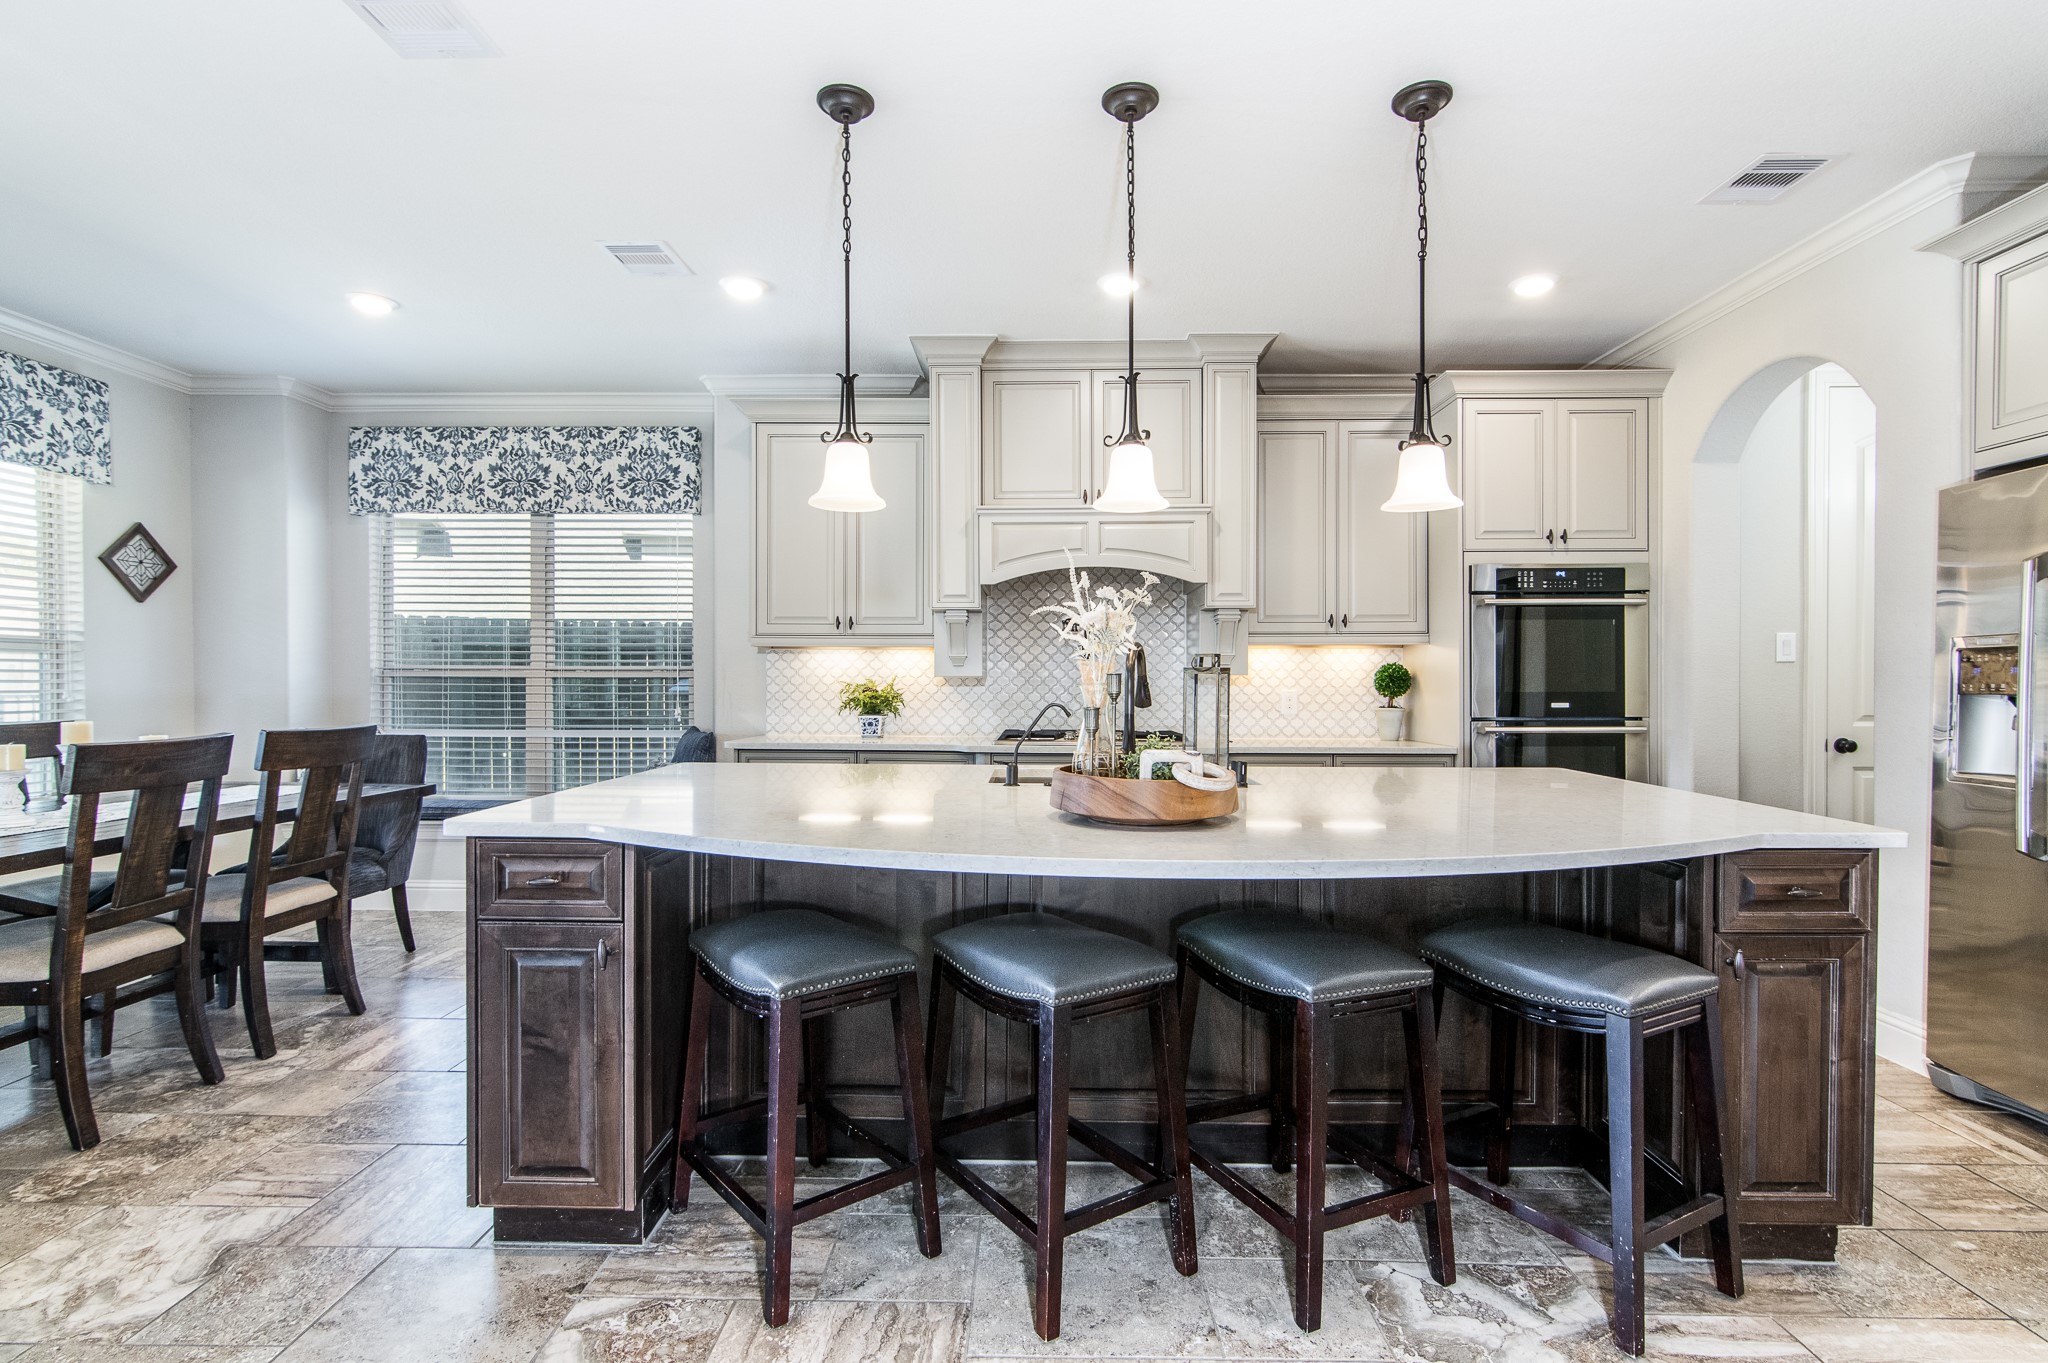 Gourmet Island Kitchen w/ Amazing Glazed Cabinets, Customized window treatments and Granite Countertops with upgraded appliances! 42 inch cabinets with endless storage.  Huge island with bar top seating.